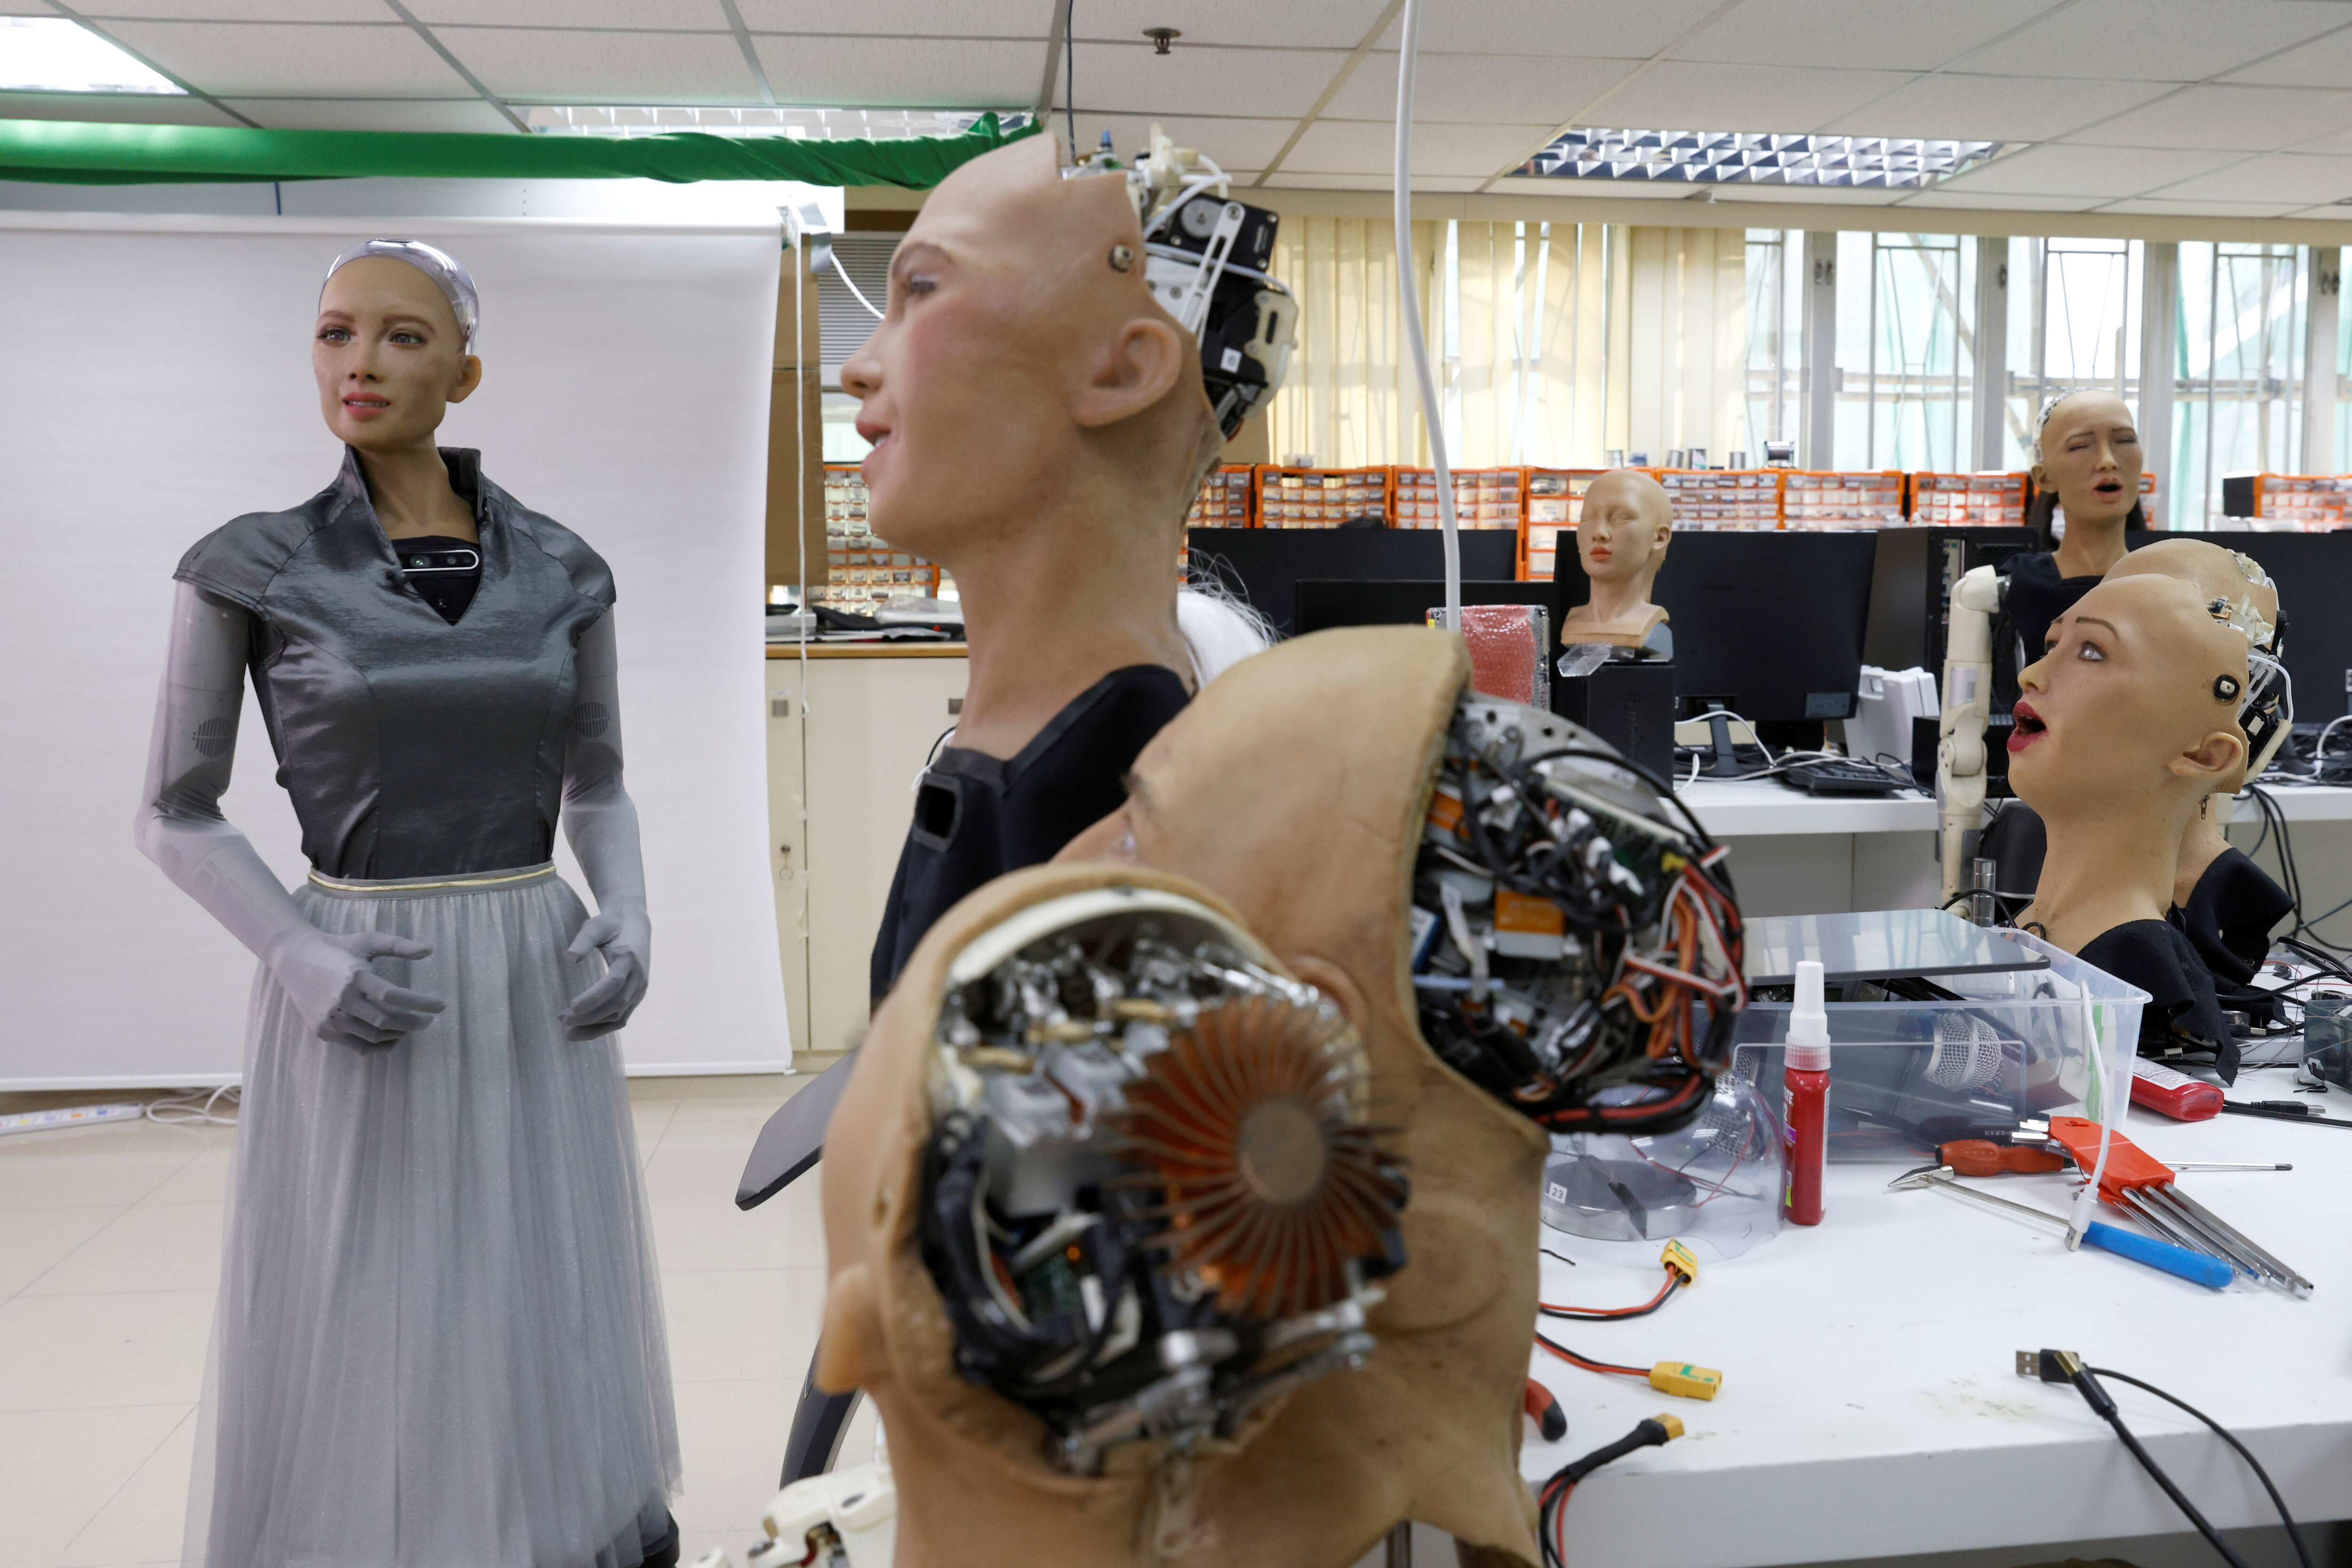 Sophia the humanoid robot set for mass production amid pandemic